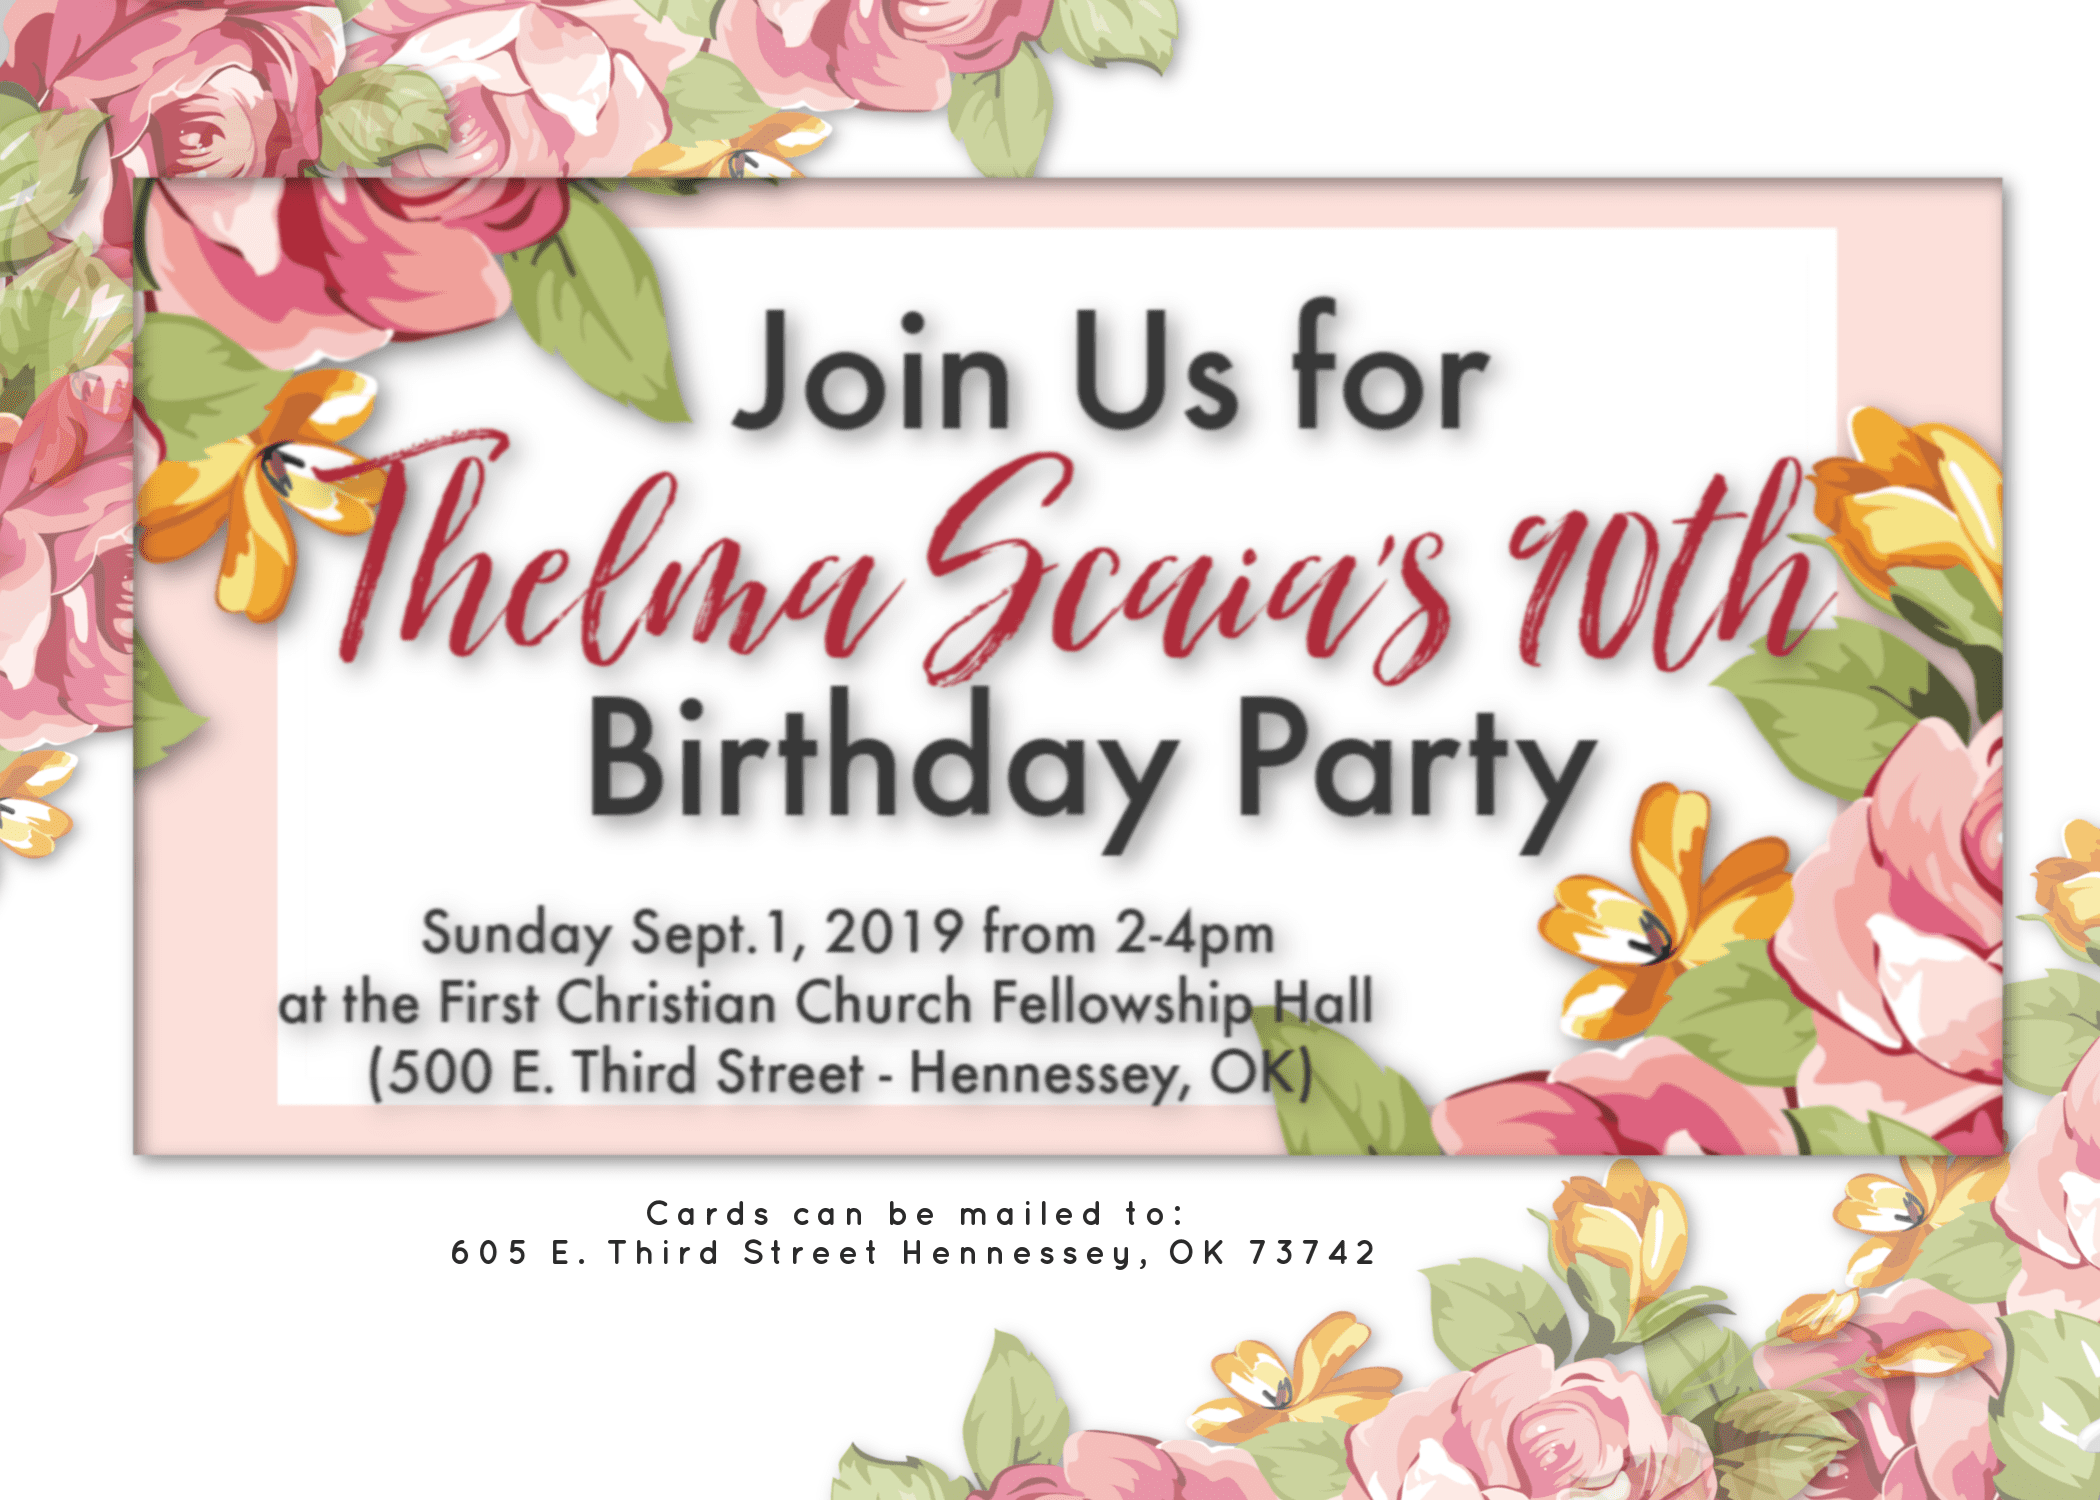 EVERYONE IS INVITED TO THELMA SCAIA’S 90TH BIRTHDAY PARTY